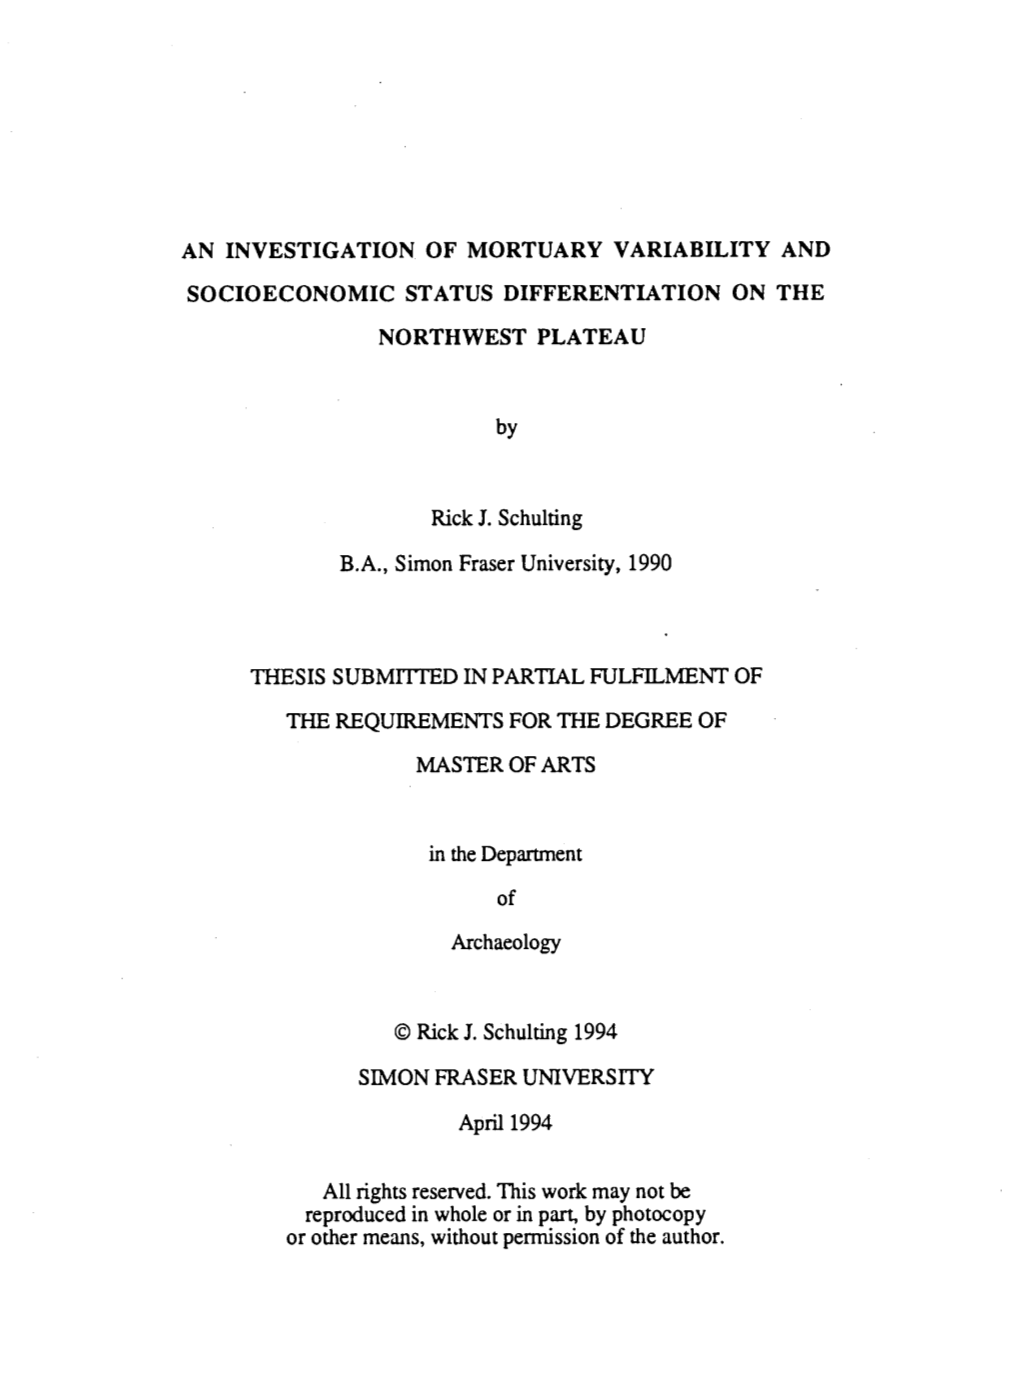 An Investigation of Mortuary Variablility and Socioeconomic Status